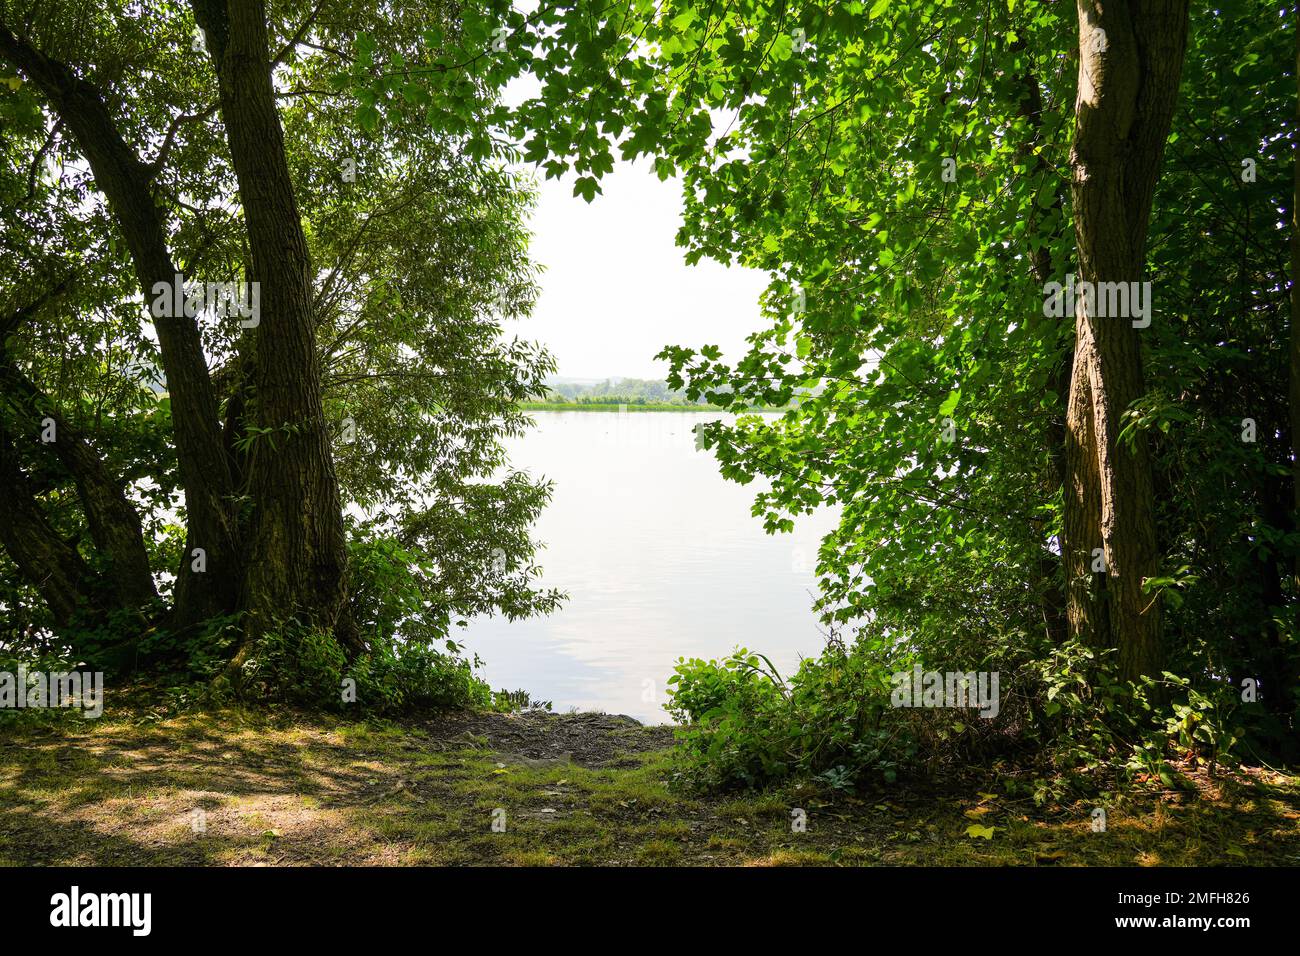 Hengsen reservoir in the Bahnwald nature reserve near Holzwickede. Ruhr reservoir in the Ruhr area. Landscape with a lake and the surrounding nature. Stock Photo